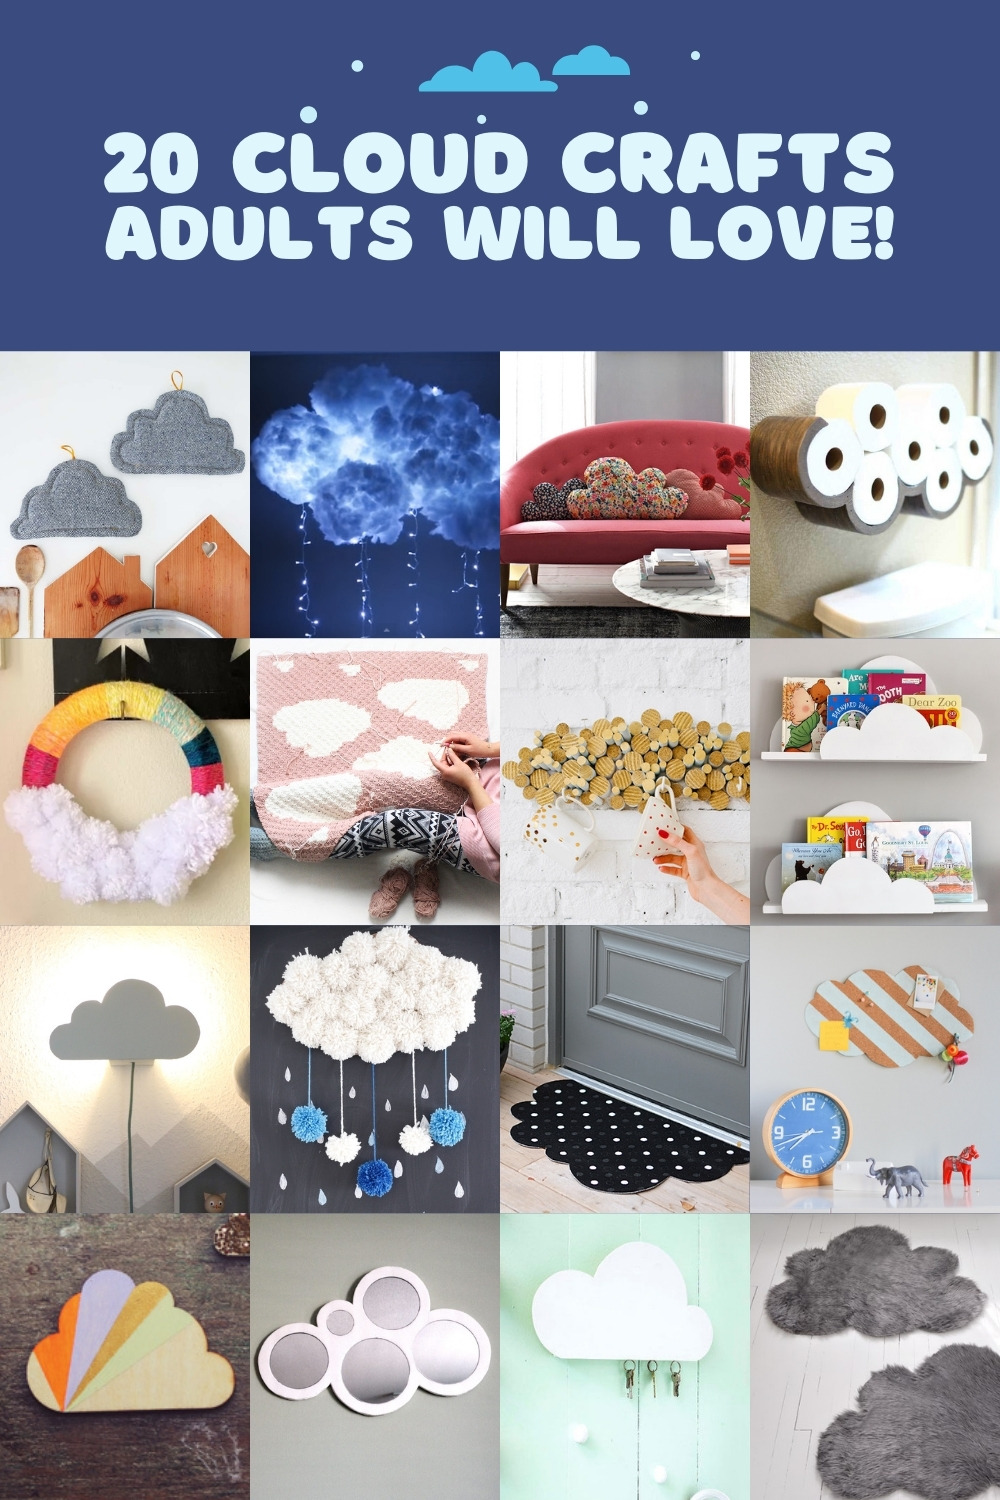 20 Cloud Crafts Adults Will Love